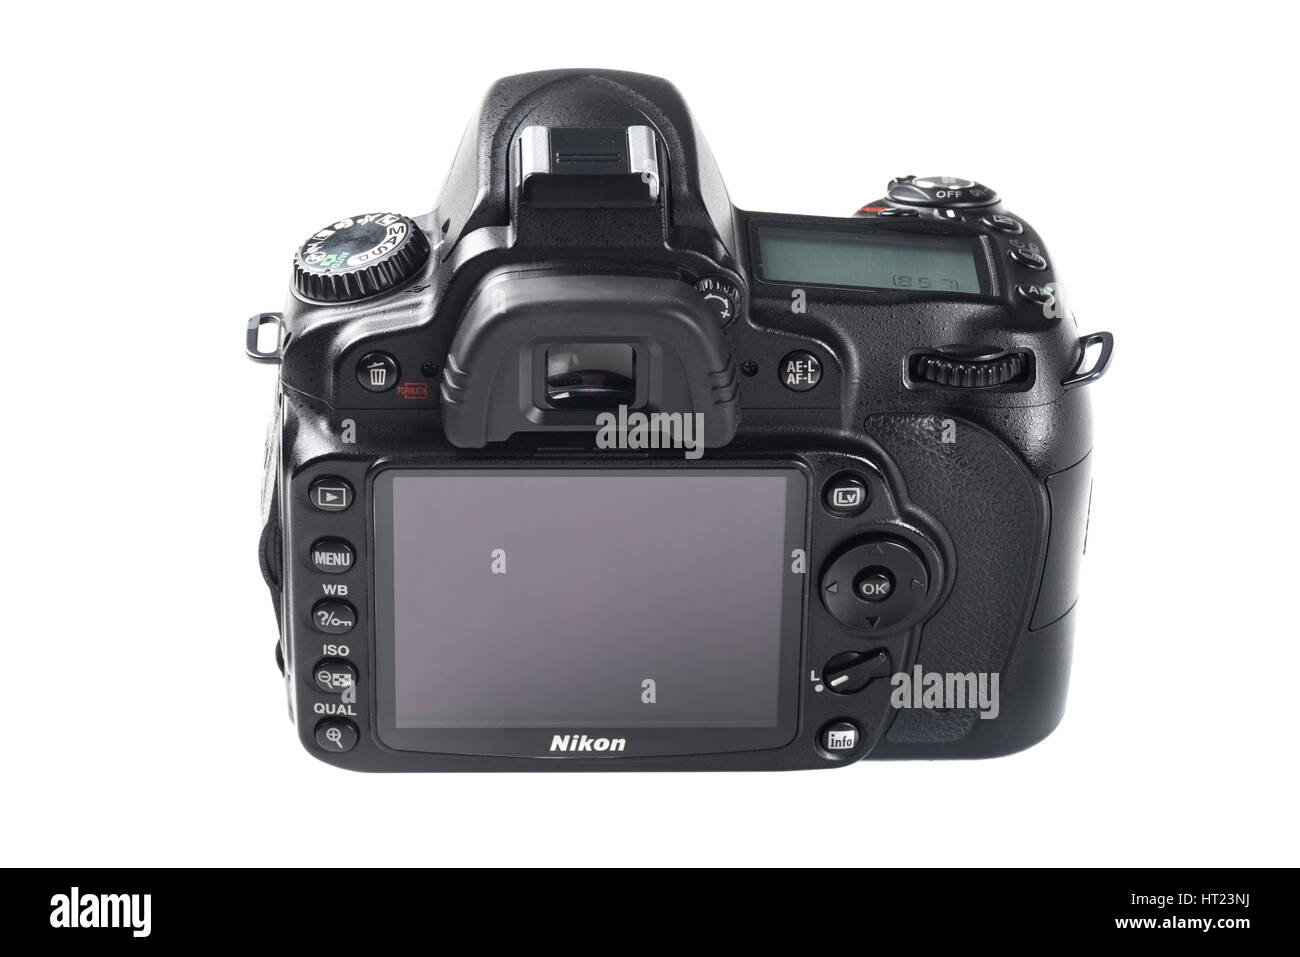 BANGKOK, THAILAND - SEPTEMBER 30, 2014: Nikon D90 camera body, The D90 was the first DSLR with video recording capabilities. Stock Photo